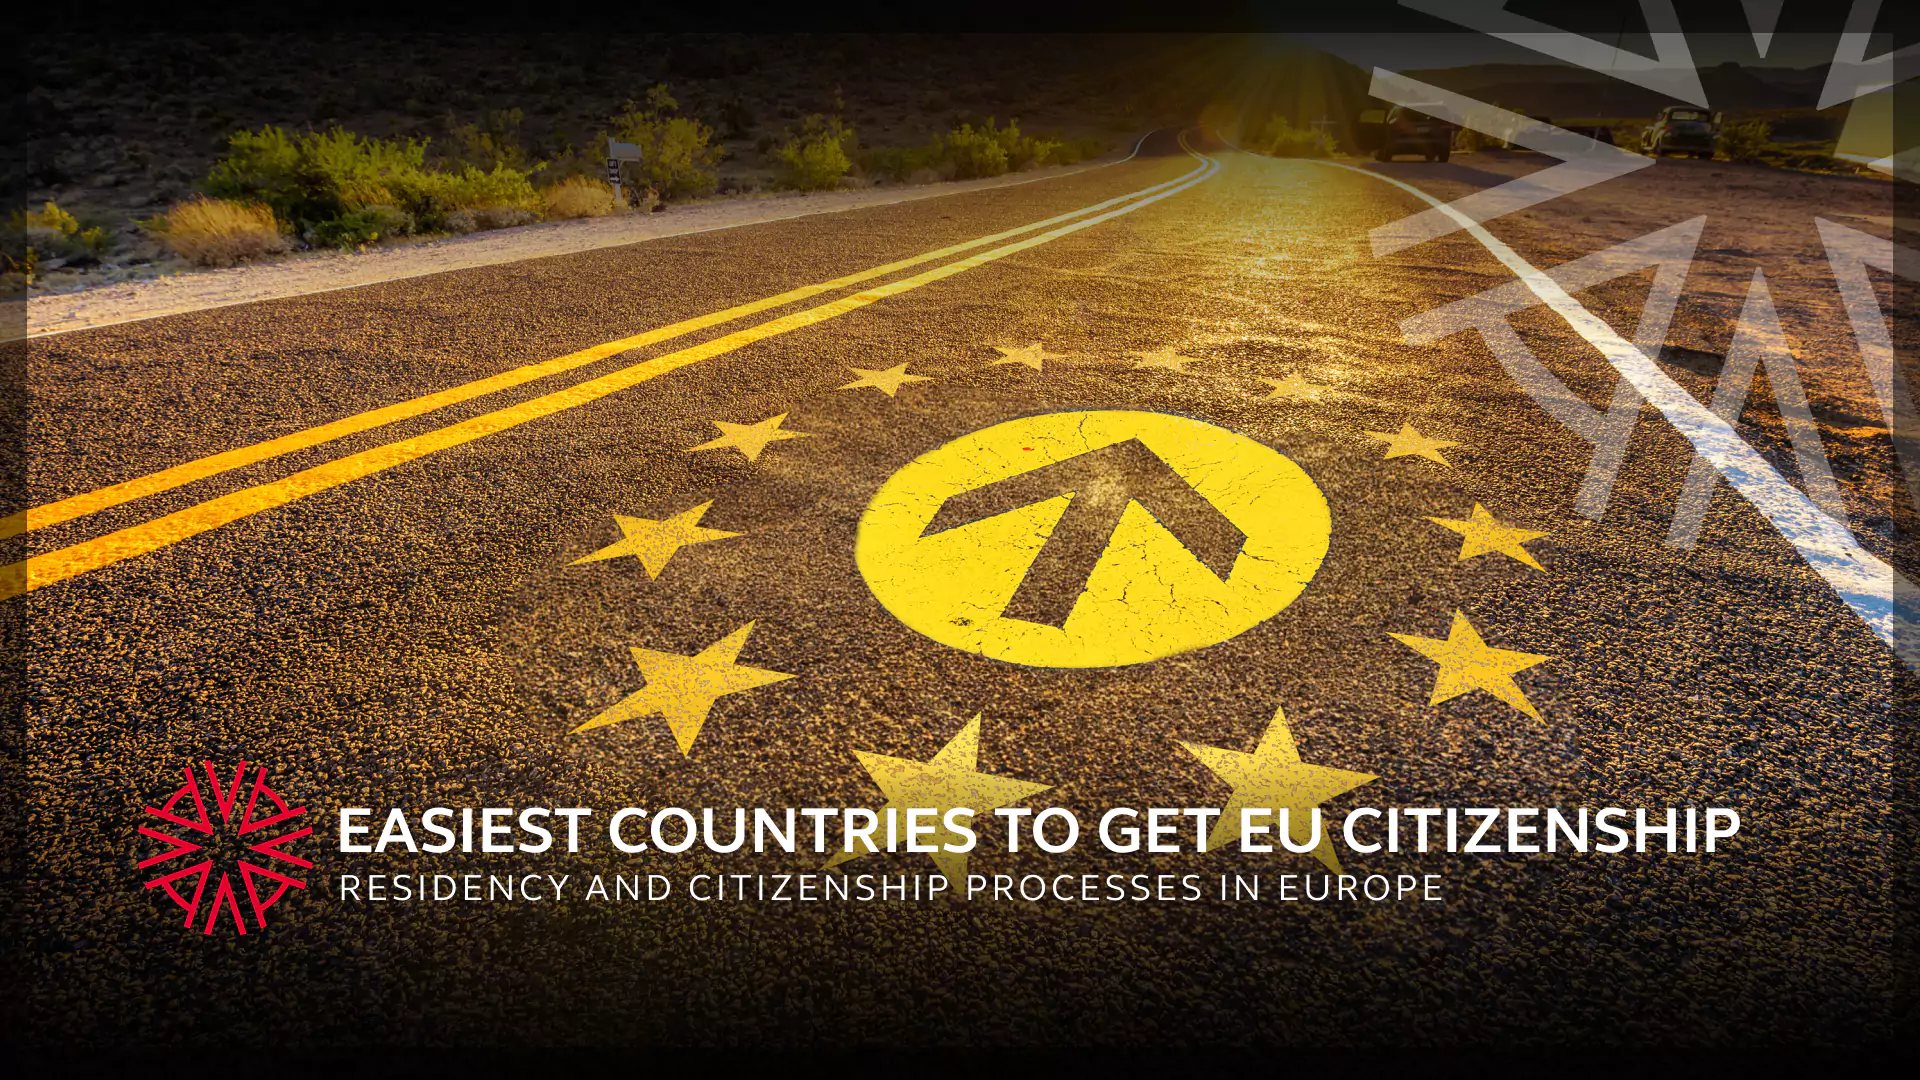 a road with a street sign of an arrow pointing to the easiest EU countries to get citizenship